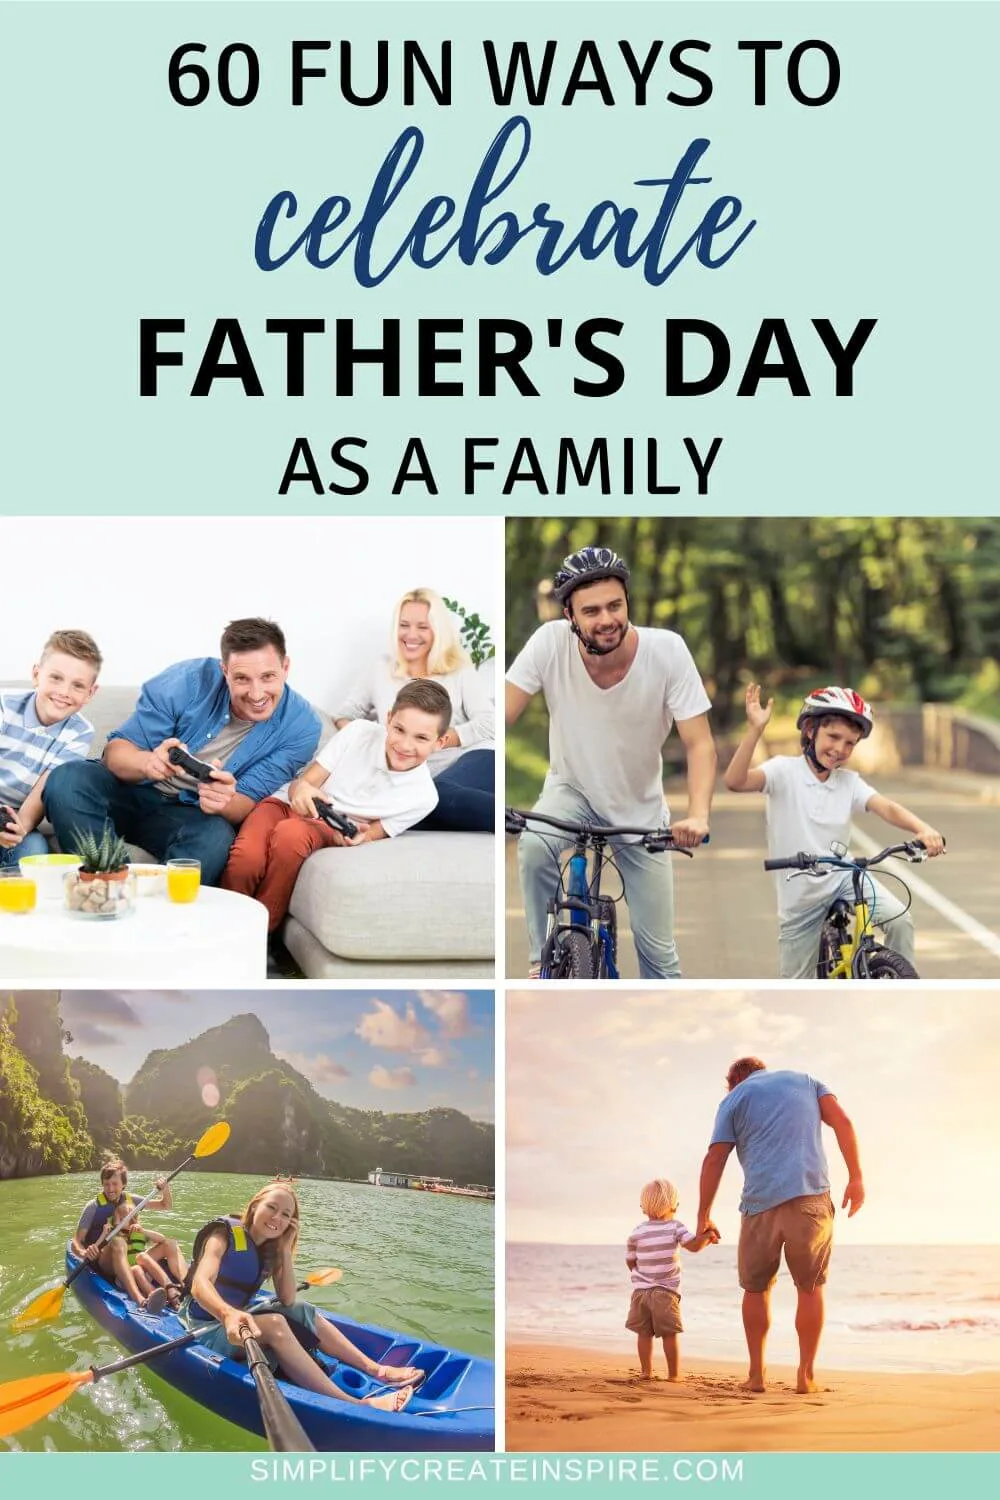 Fun things to do on father's day